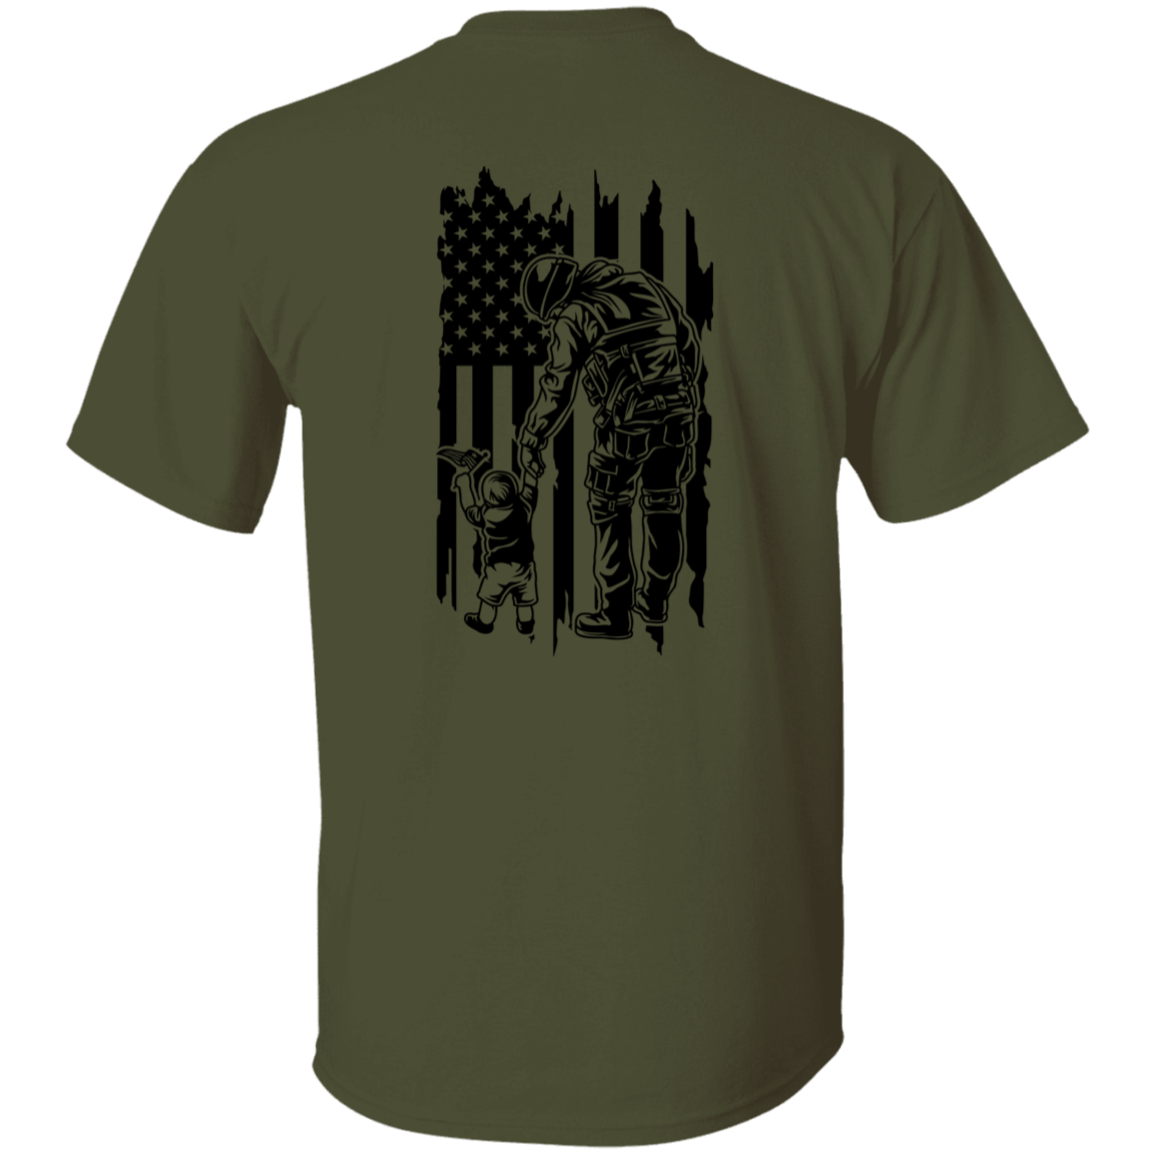 Soldier and Son Shirt